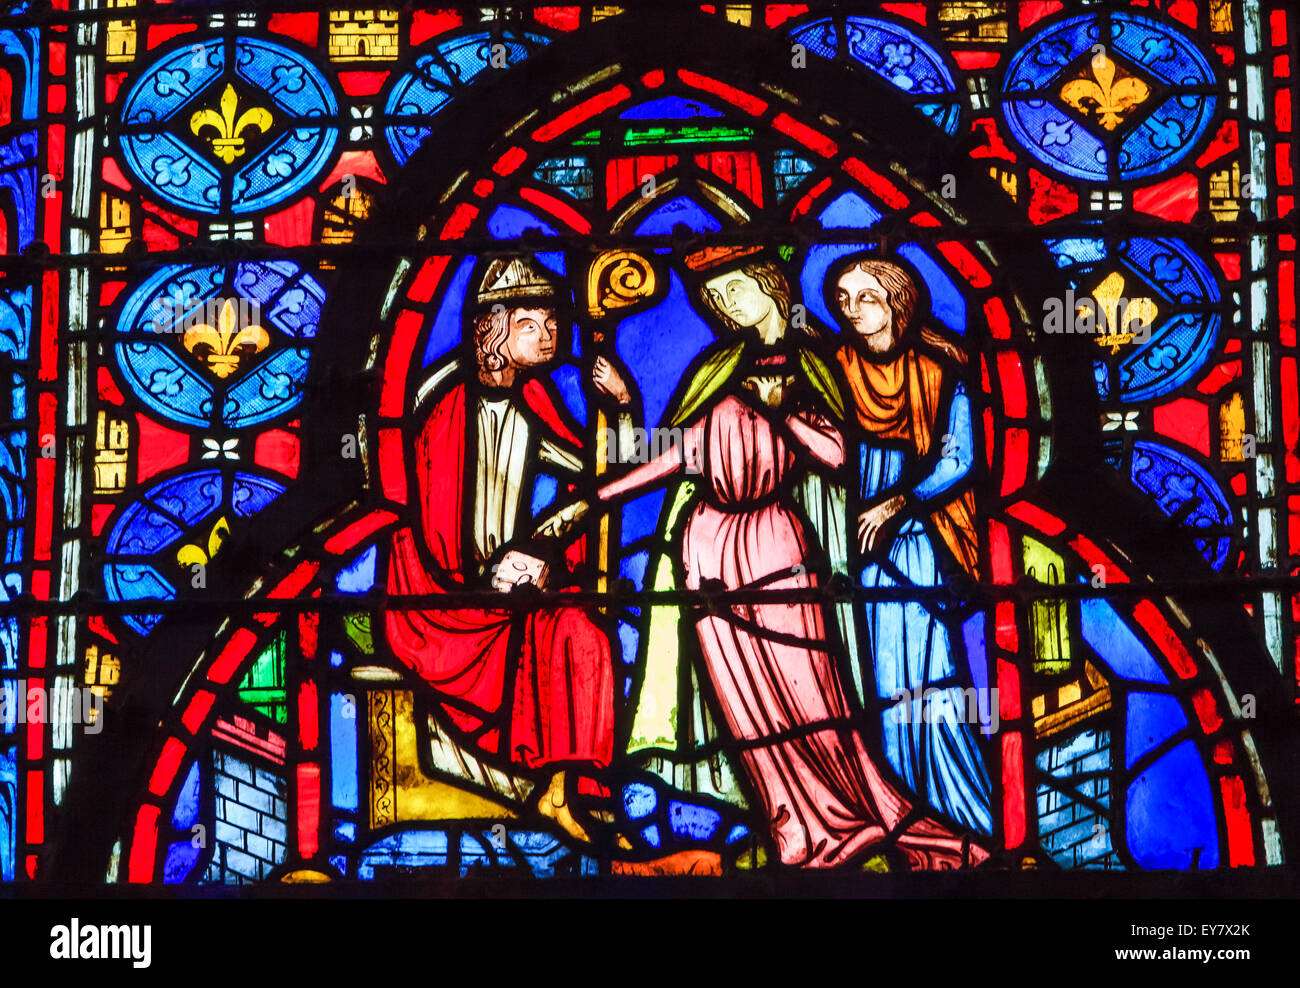 Bishop Queen Stained Glass Saint Chapelle Paris France.  Saint King Louis 9th created Sainte Chapelle in 1248 Stock Photo